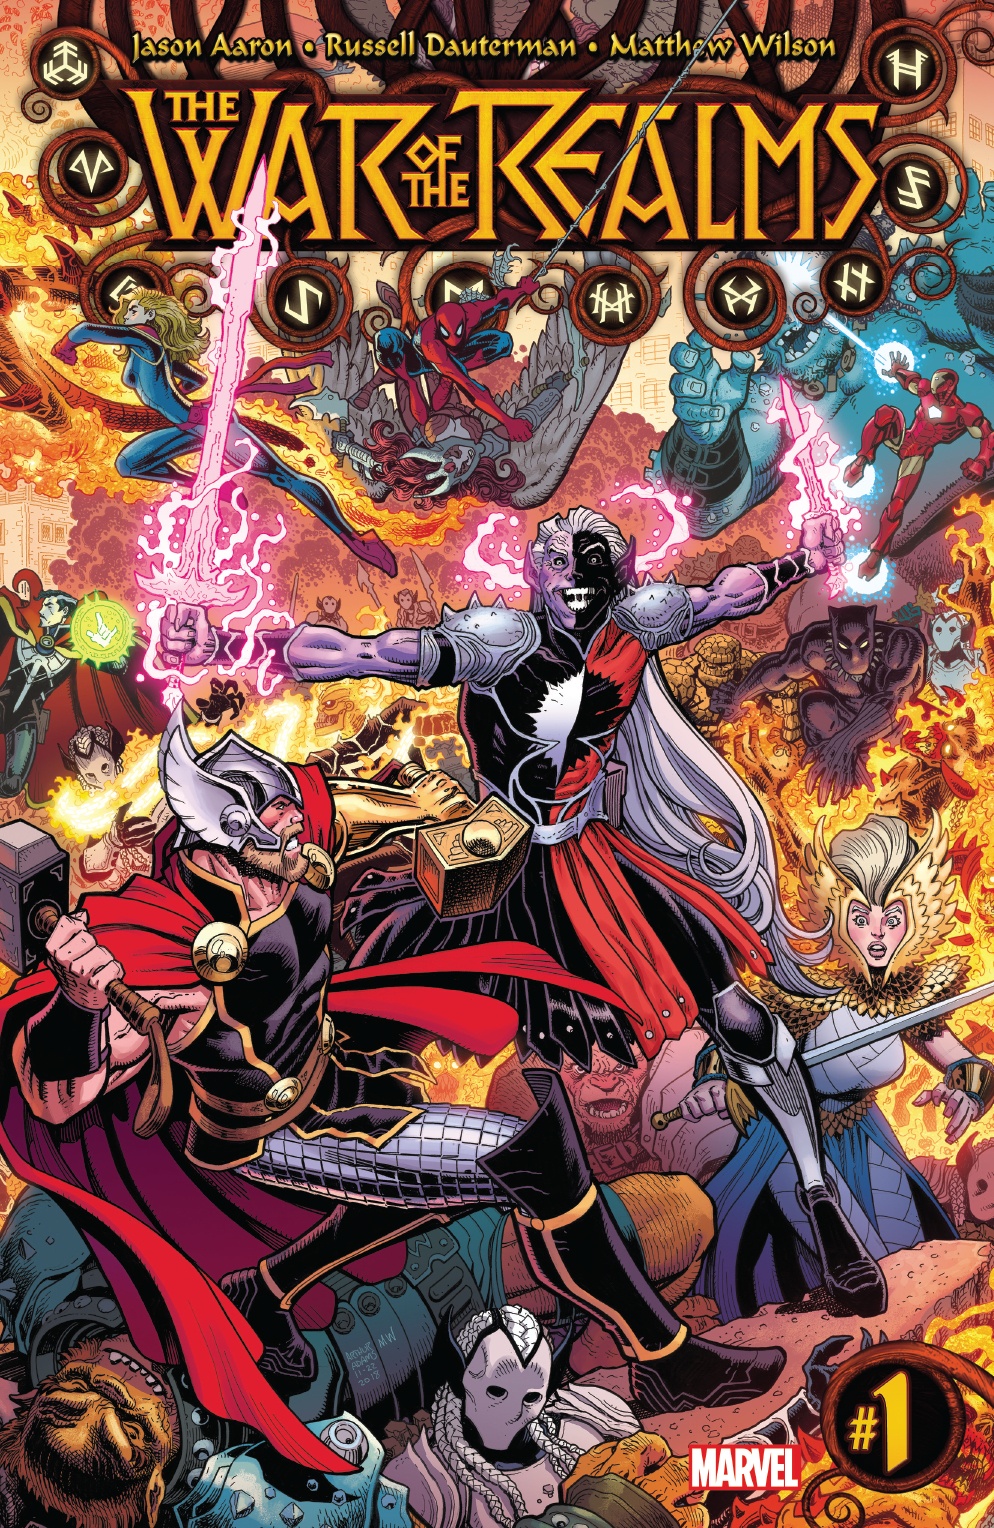 War of the Realms #1 Review